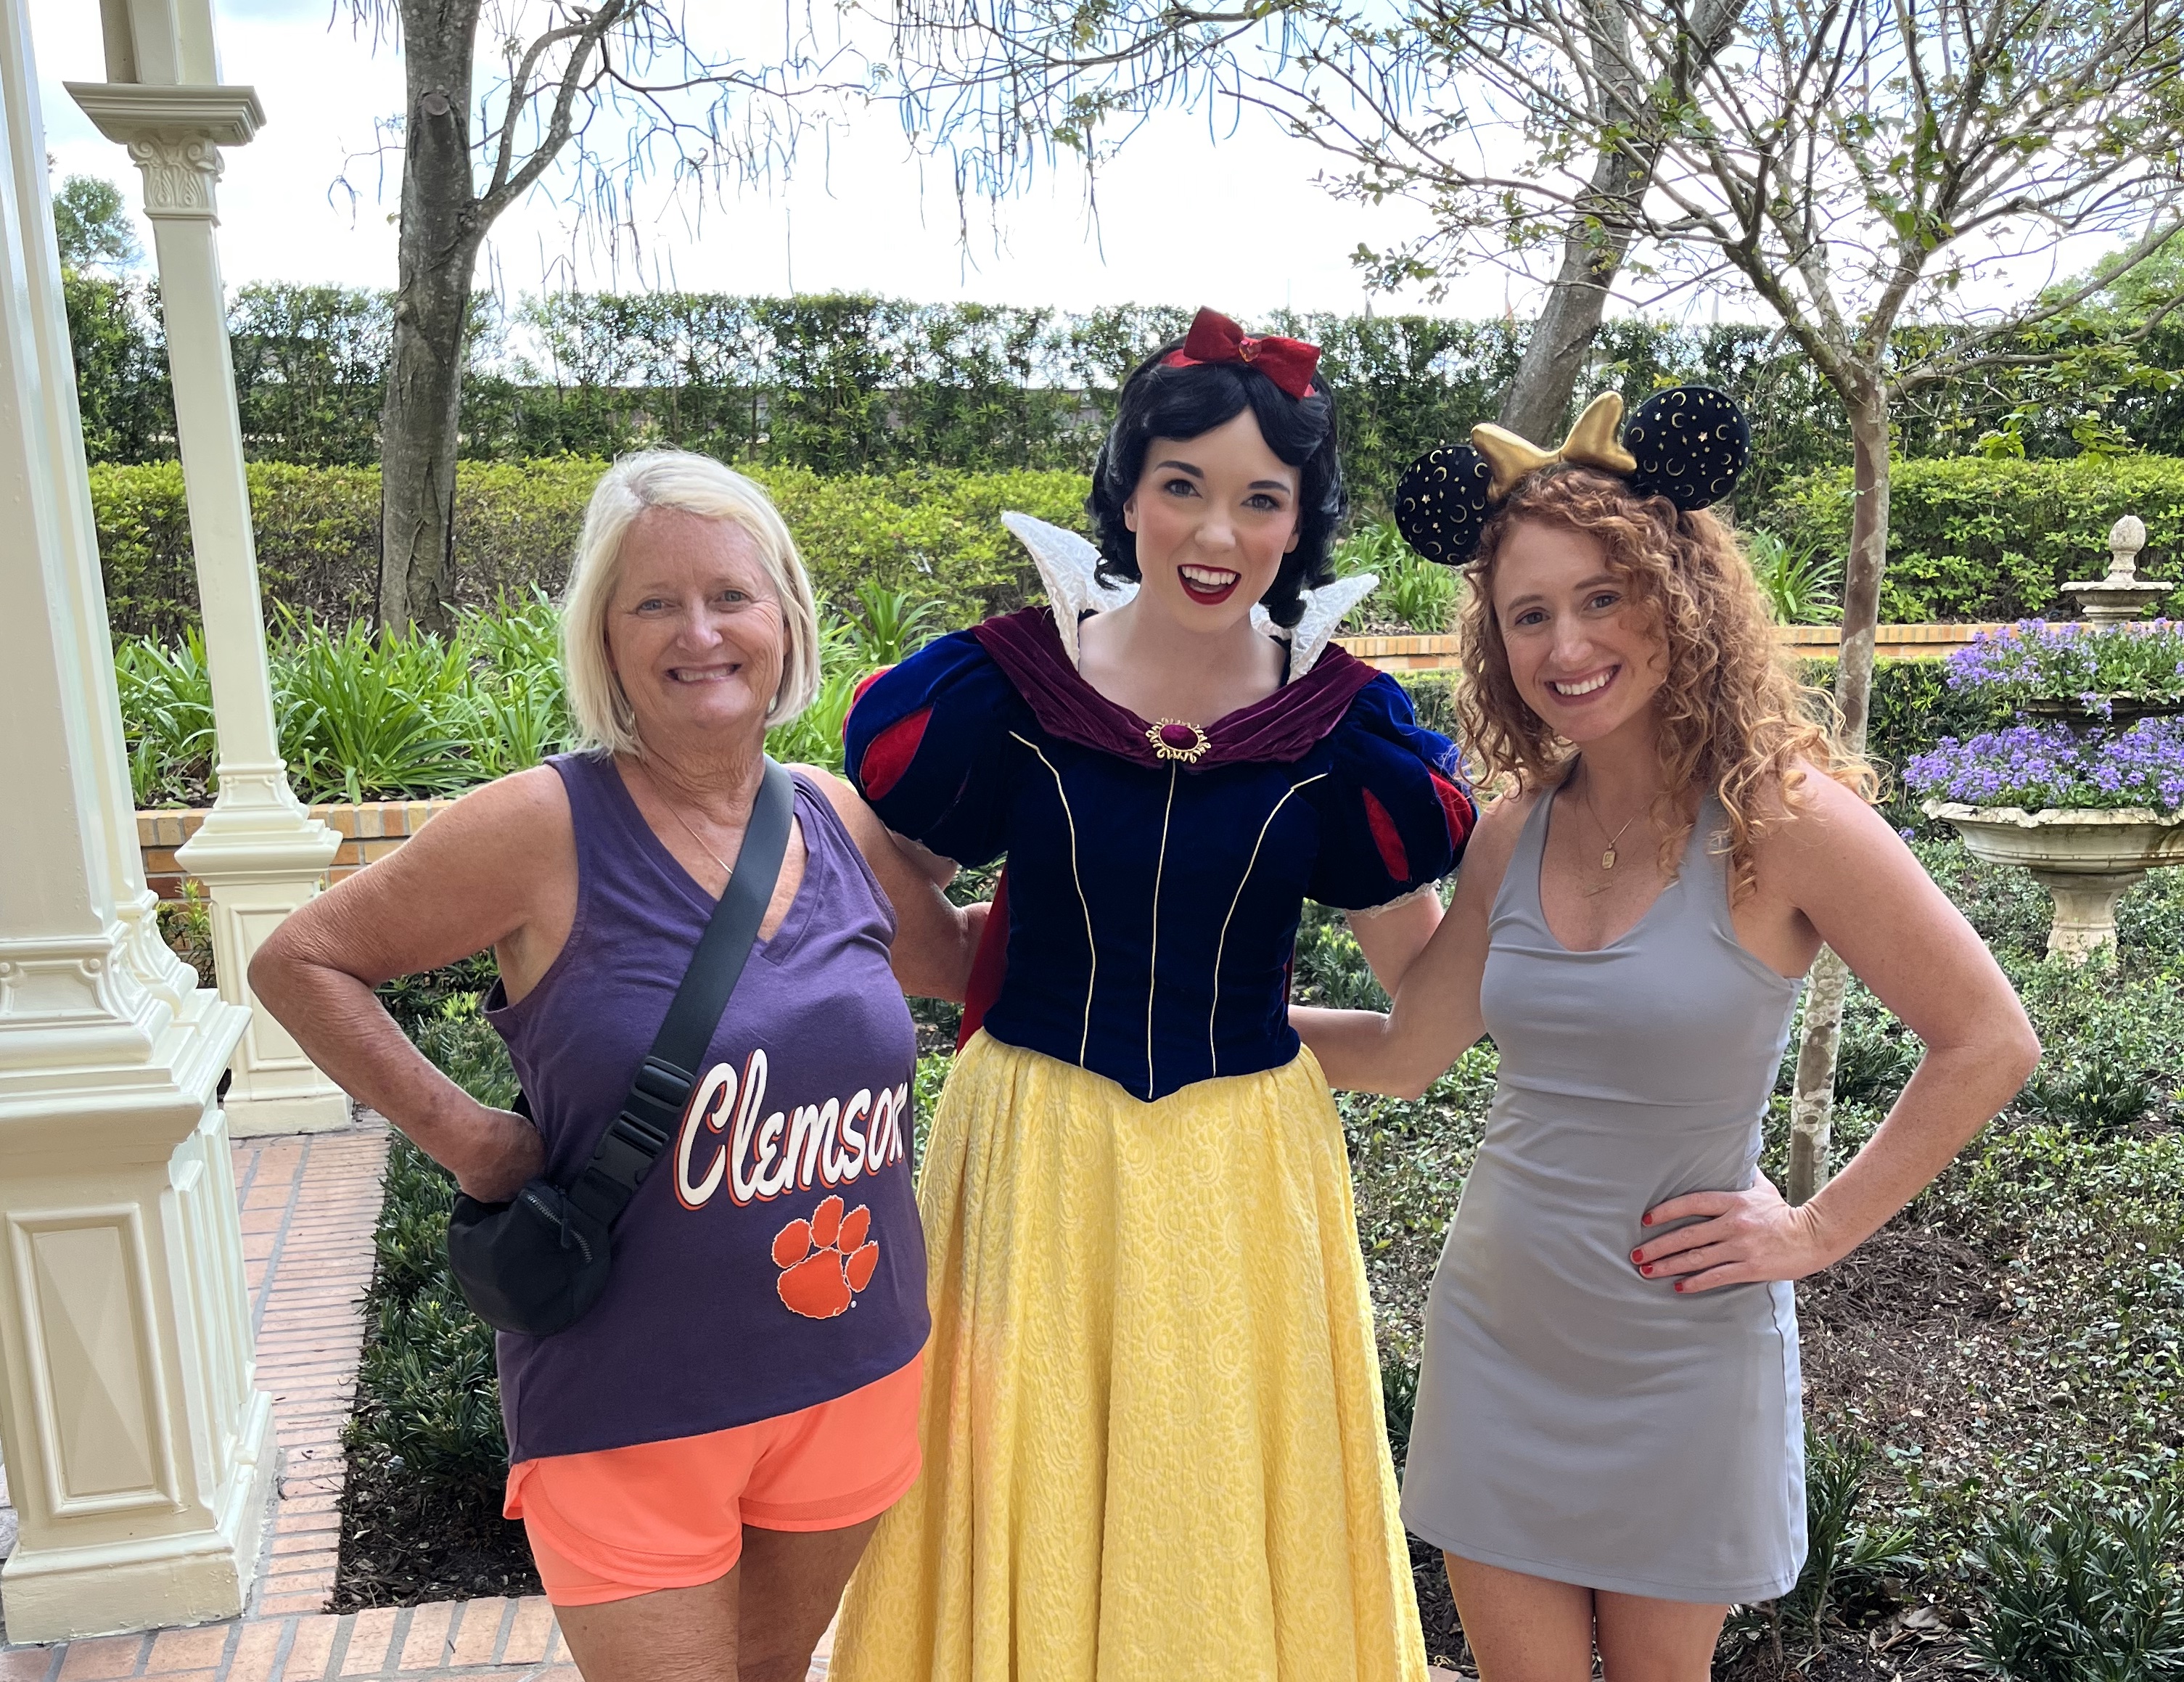 Mom and Little Sis spotted with Snow White